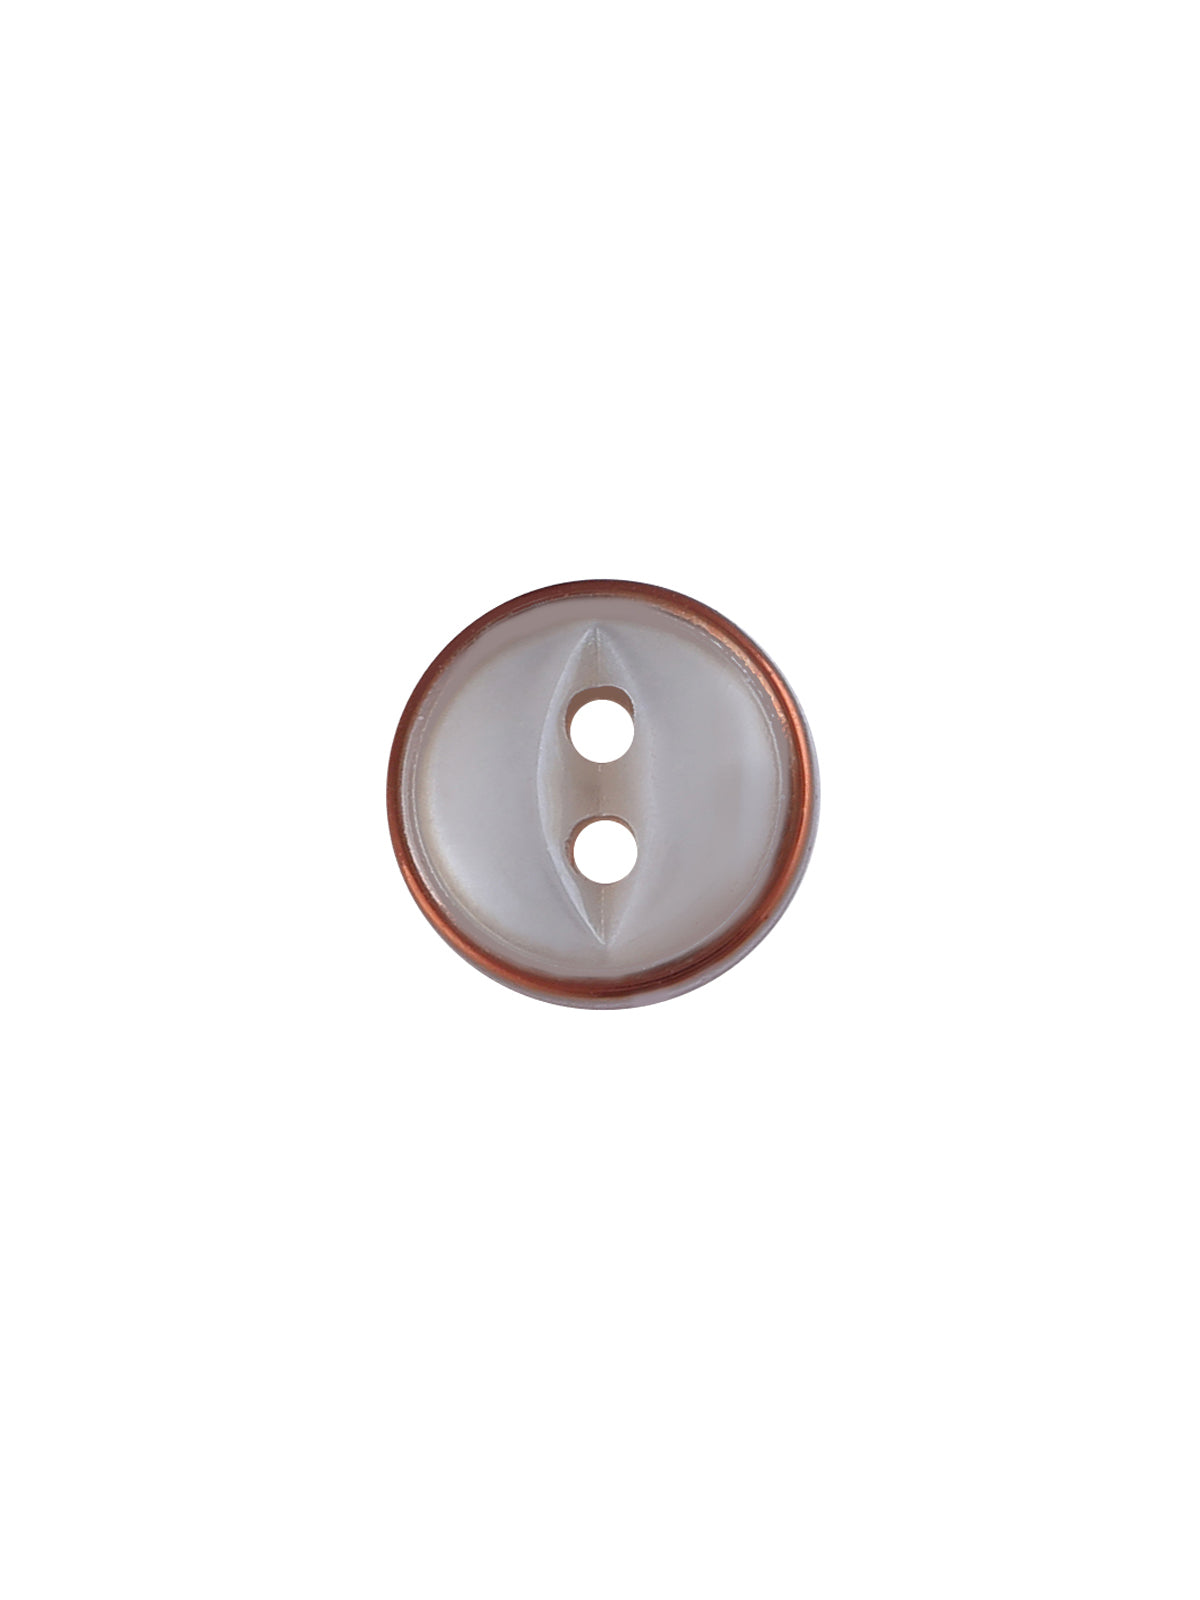 Decorative Transparent with Copper Ring 10mm Shirt Button